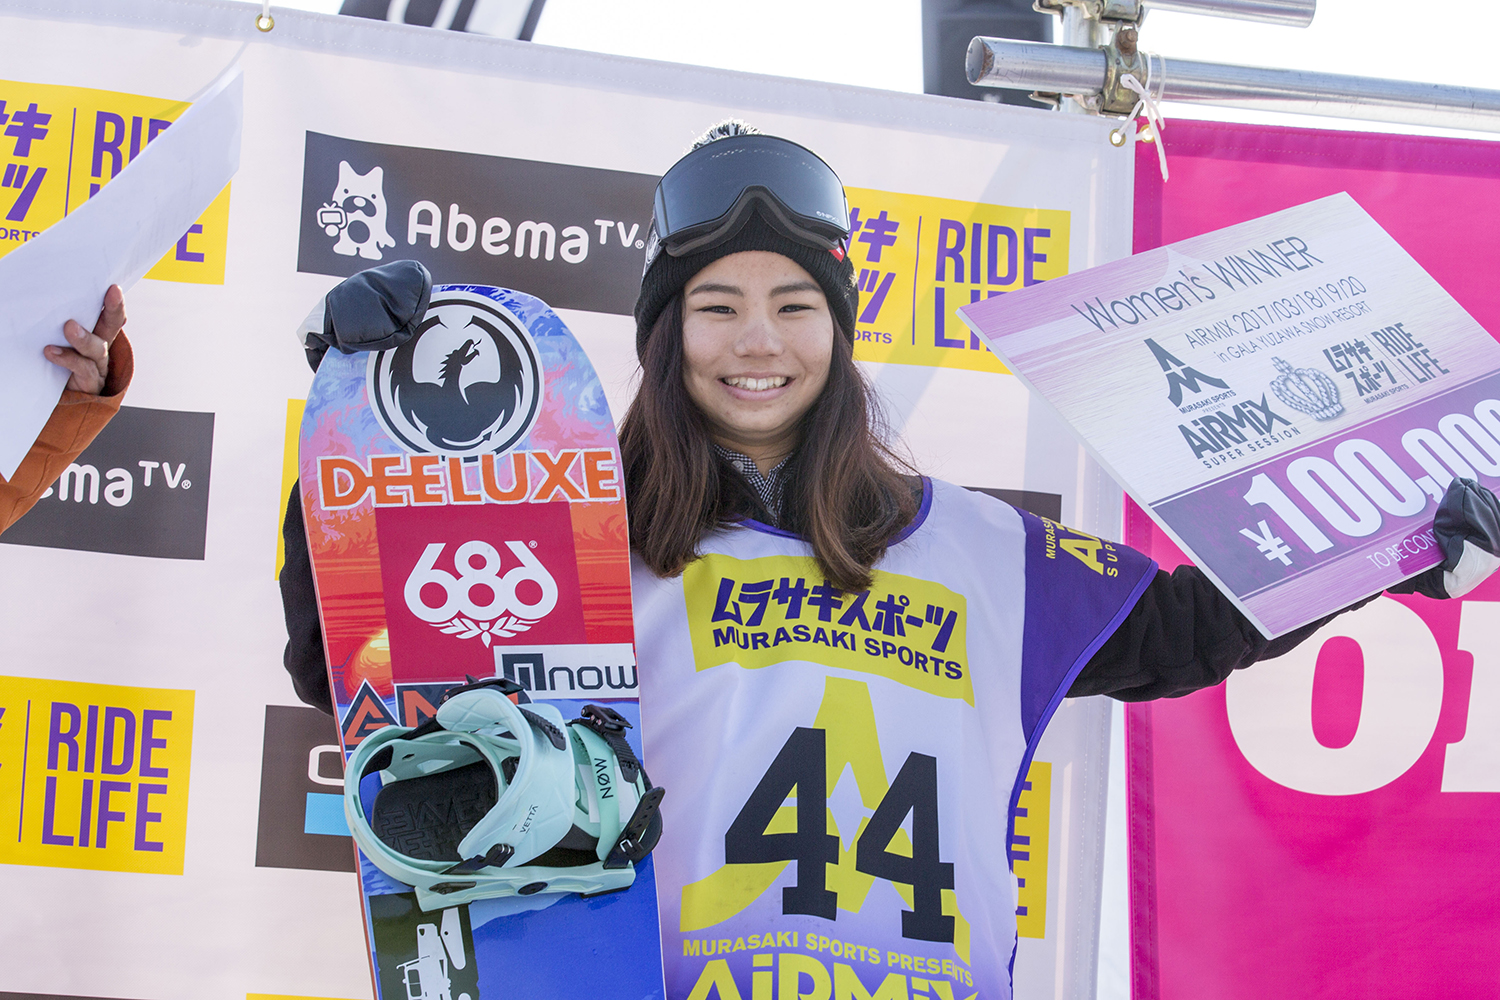 Aya Sato who won the first victory.Will the sister showdown be carried over to next year?